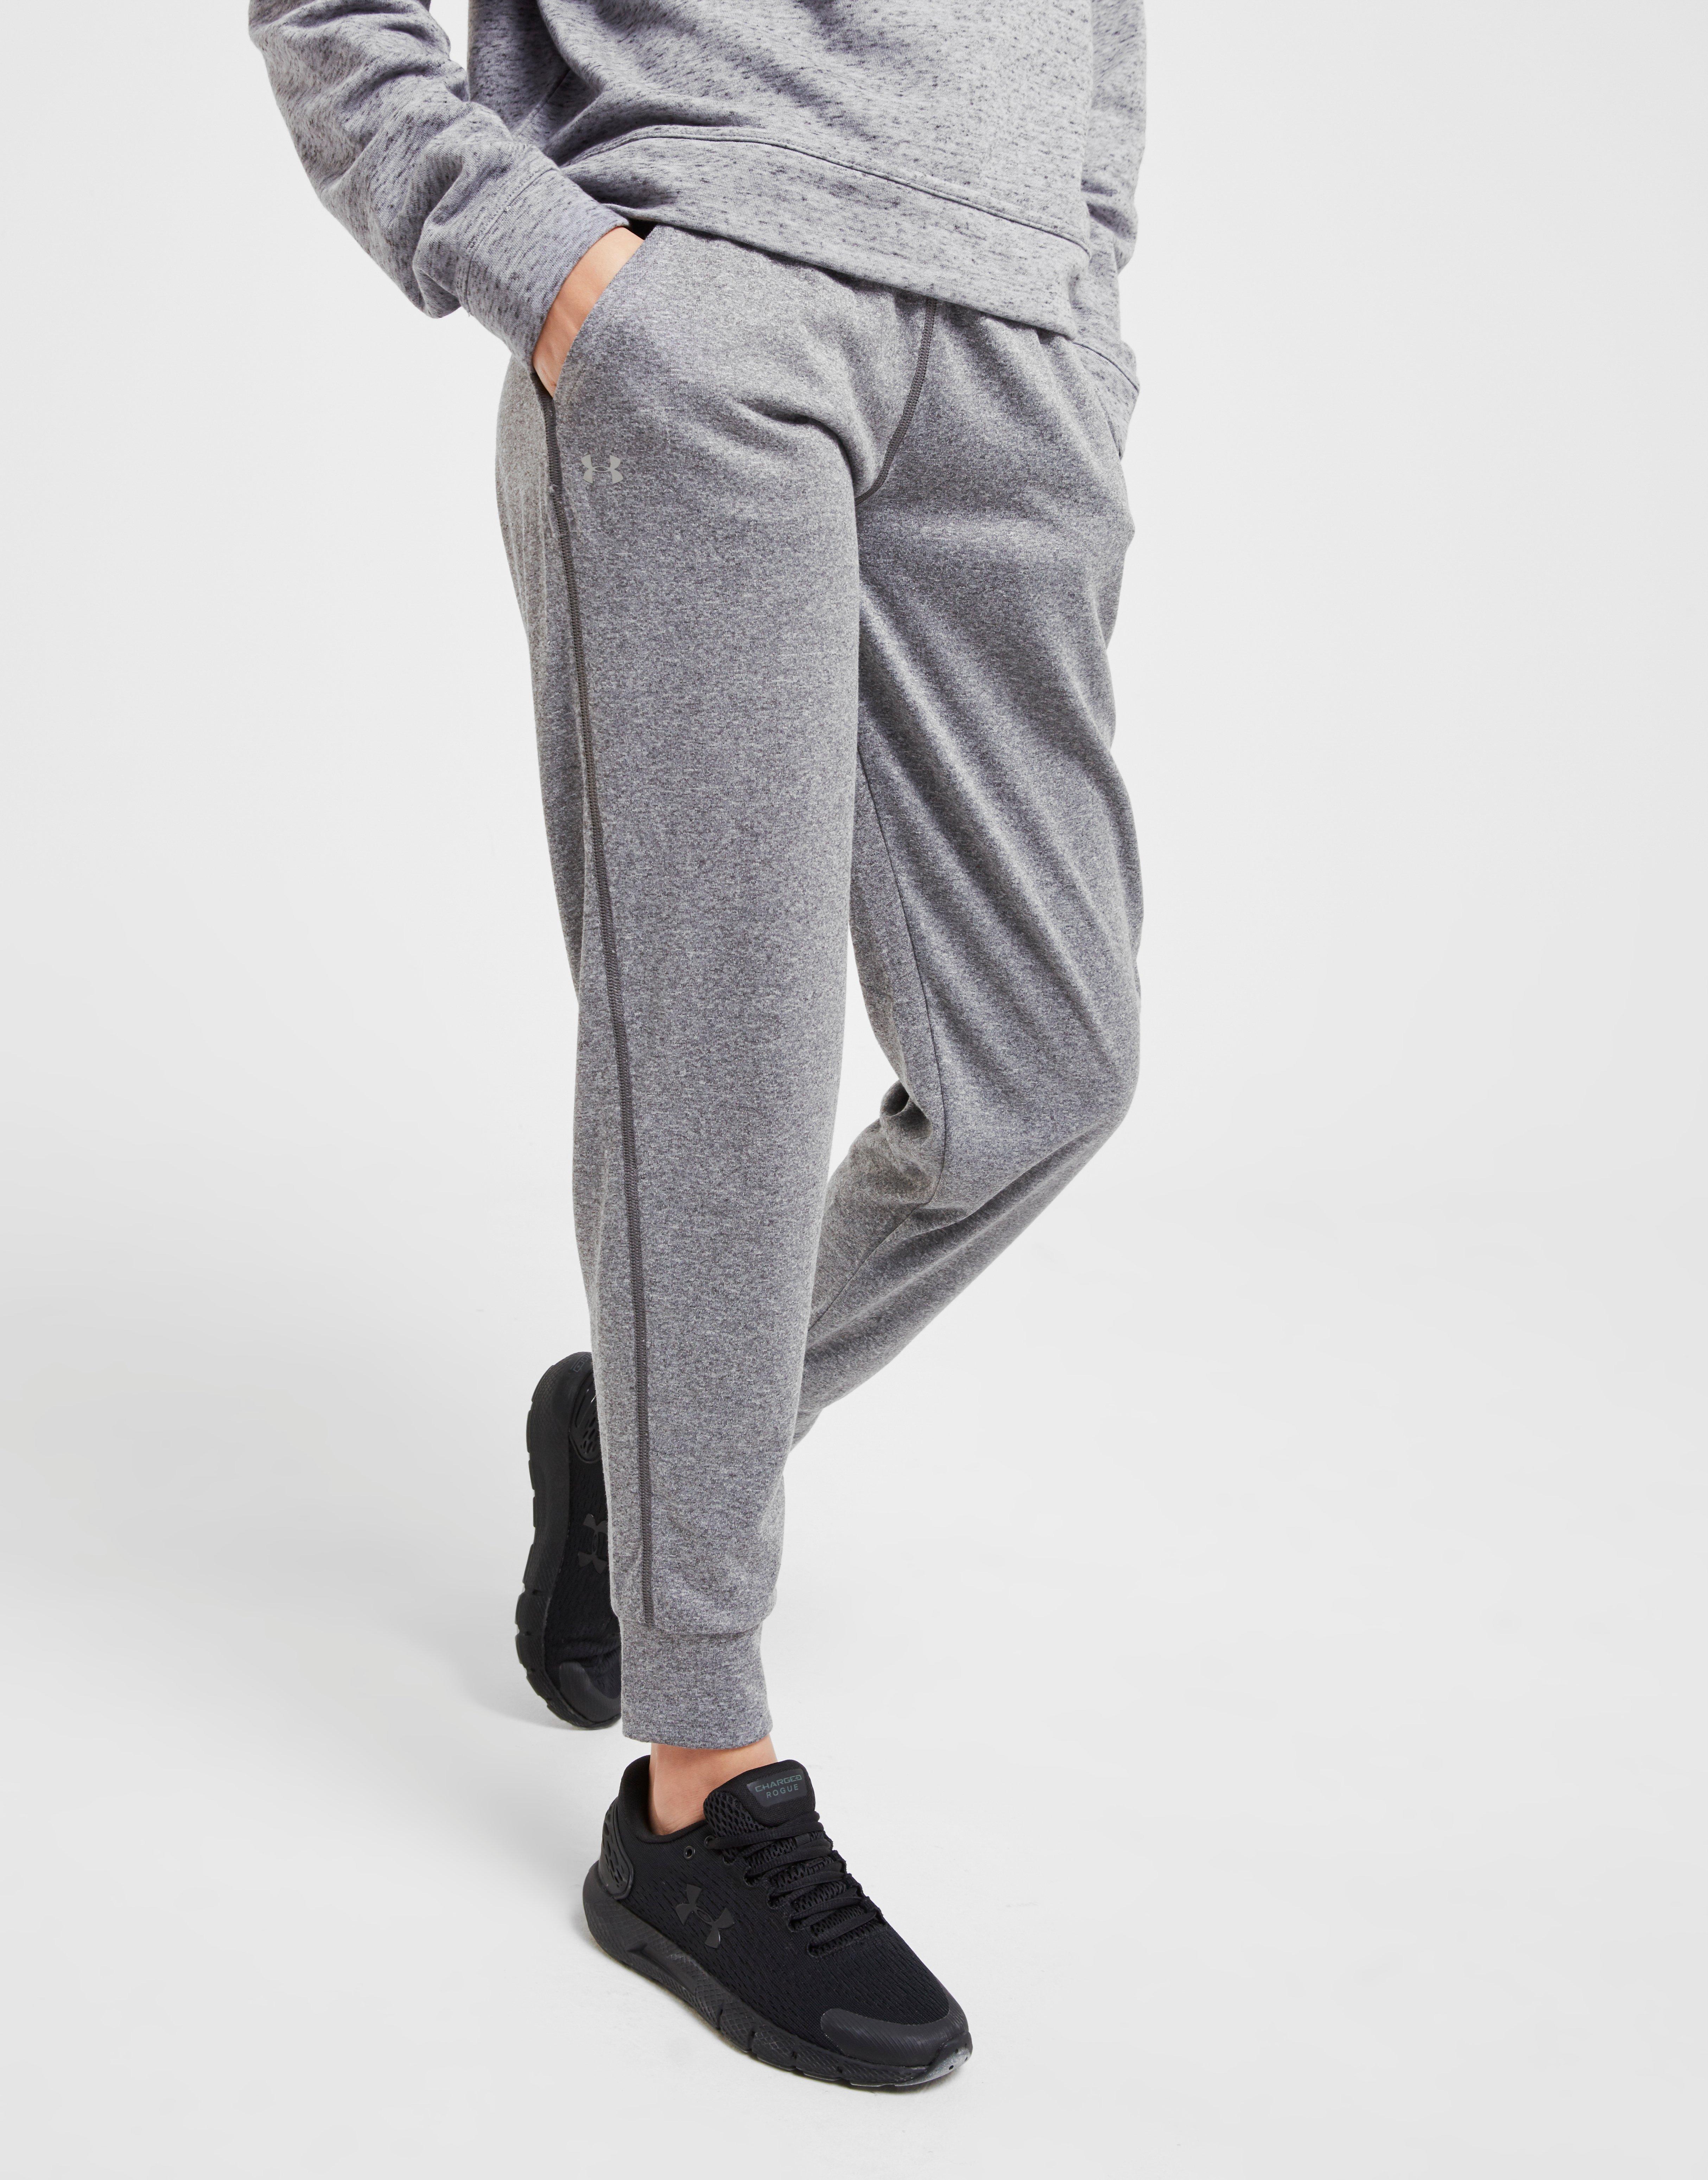 under armour track pants grey